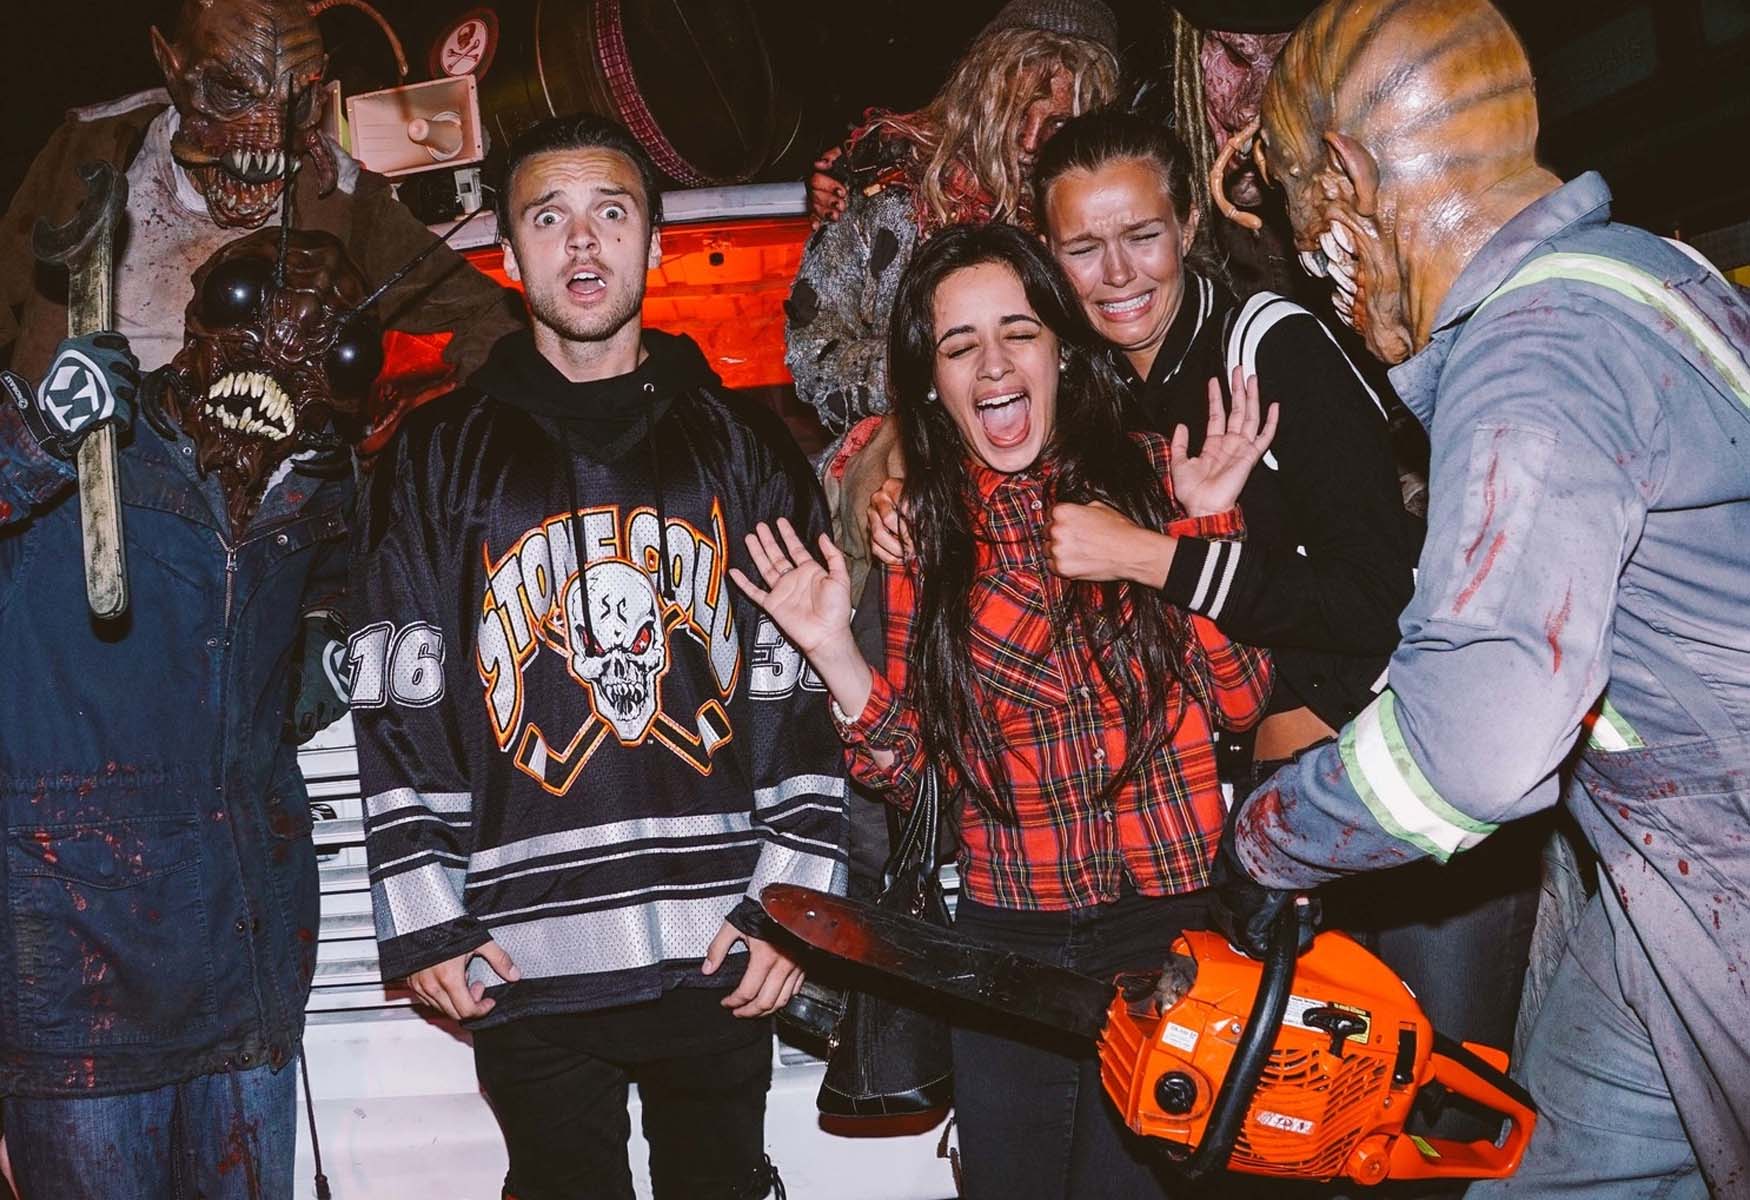 celebs-brave-the-scares-at-halloween-horror-nights-scary-fun-photos